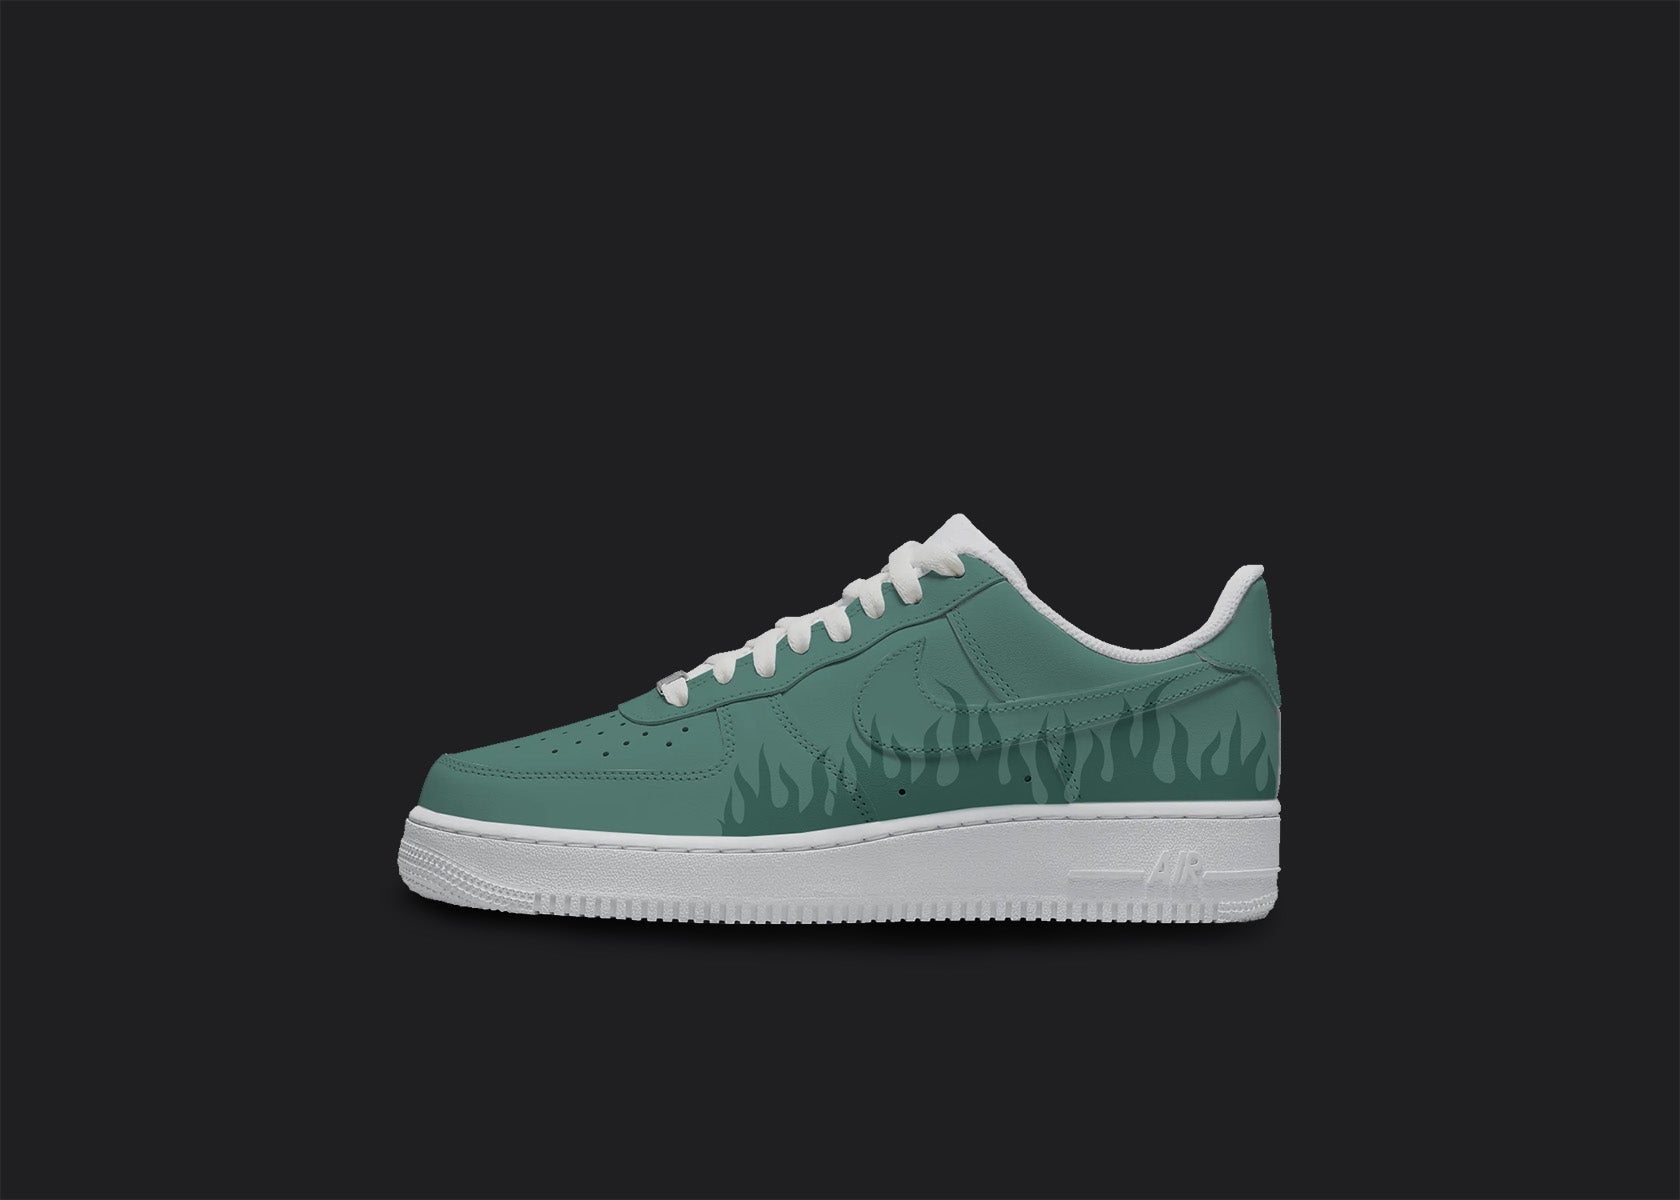 The image is of a Custom Nike Air force 1 sneaker on a blank black background. The white custom sneaker has all over Green flames design.